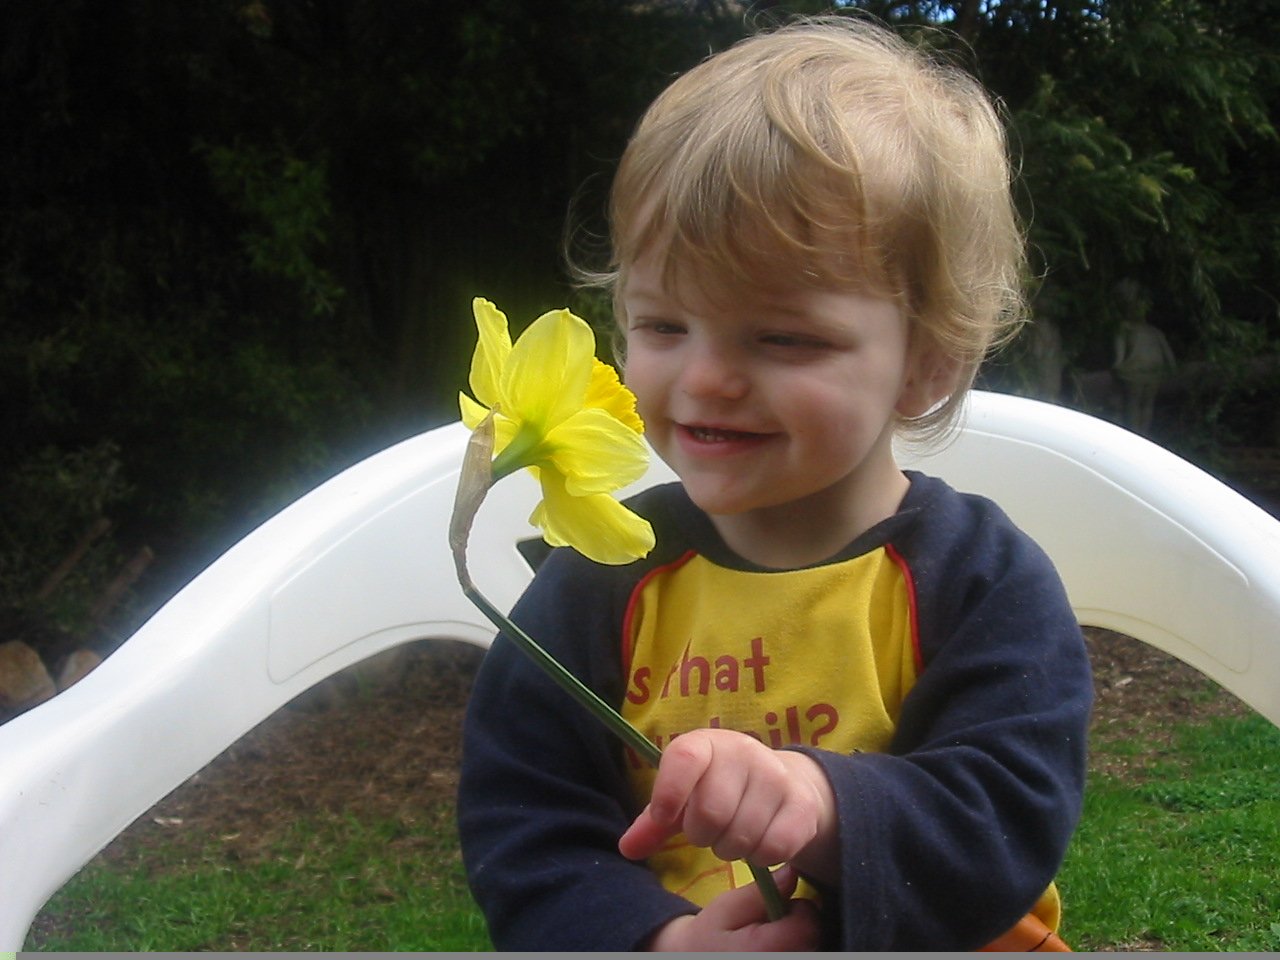 the child is smiling with the yellow flower